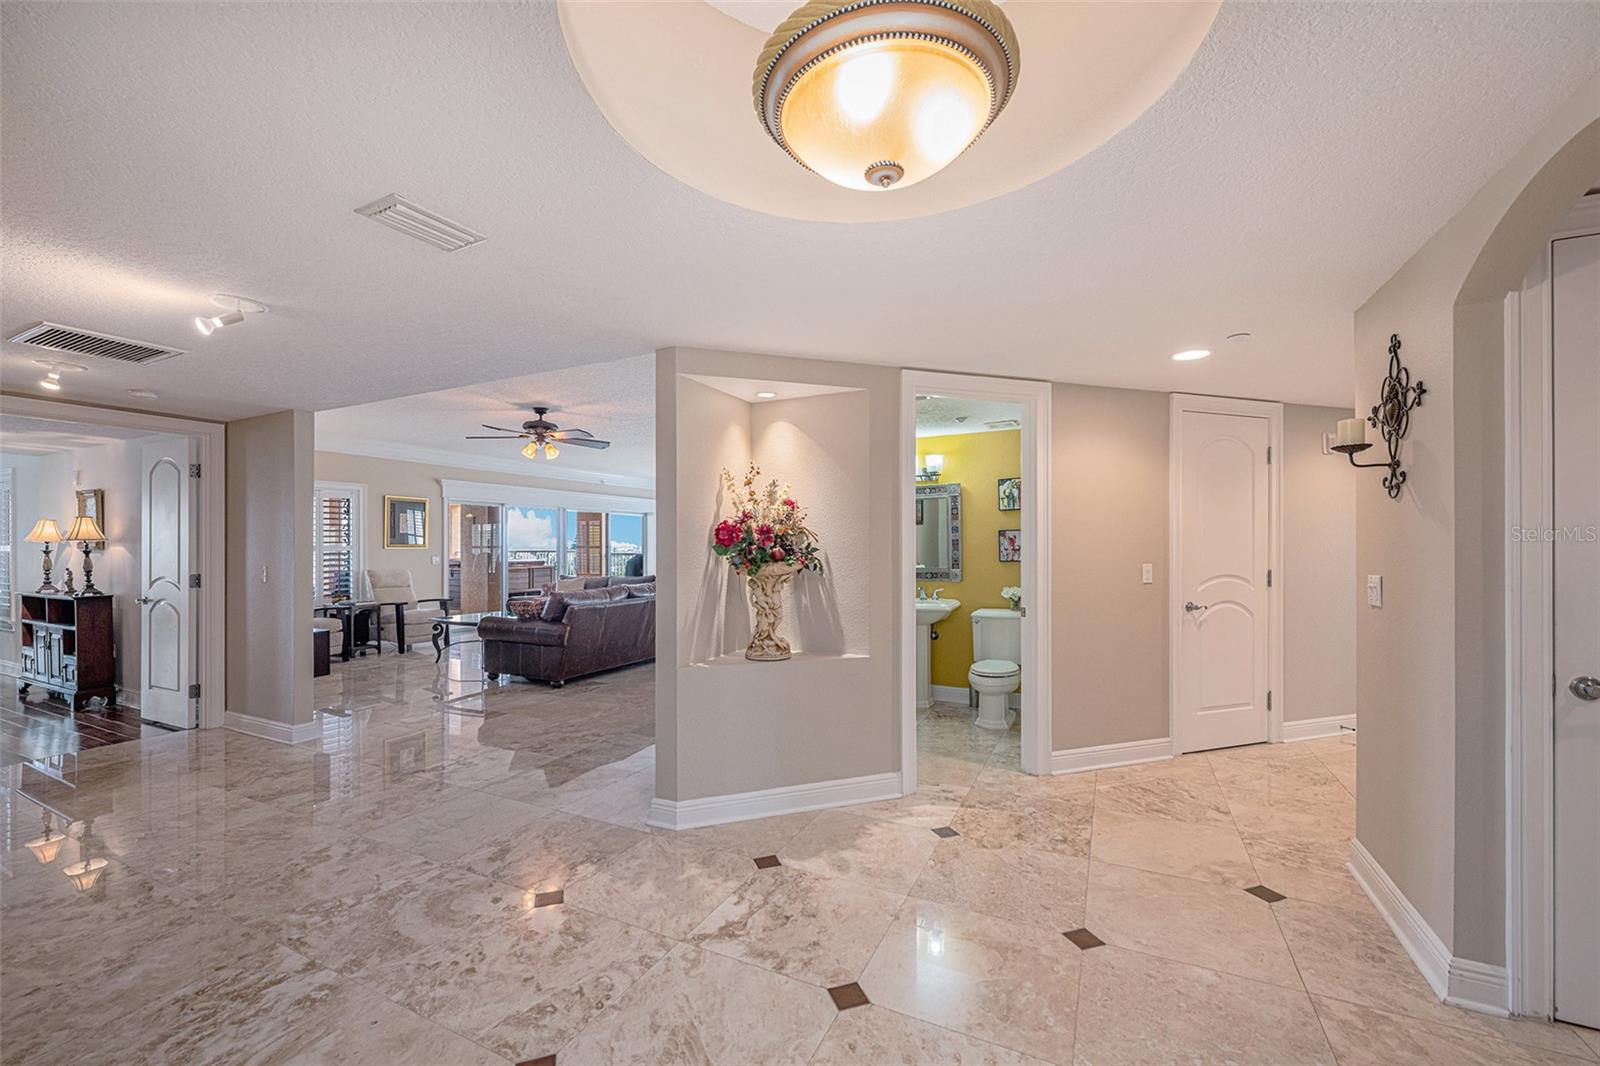 Elegant and Extraordinary - A one of a kind condo with stunning details.